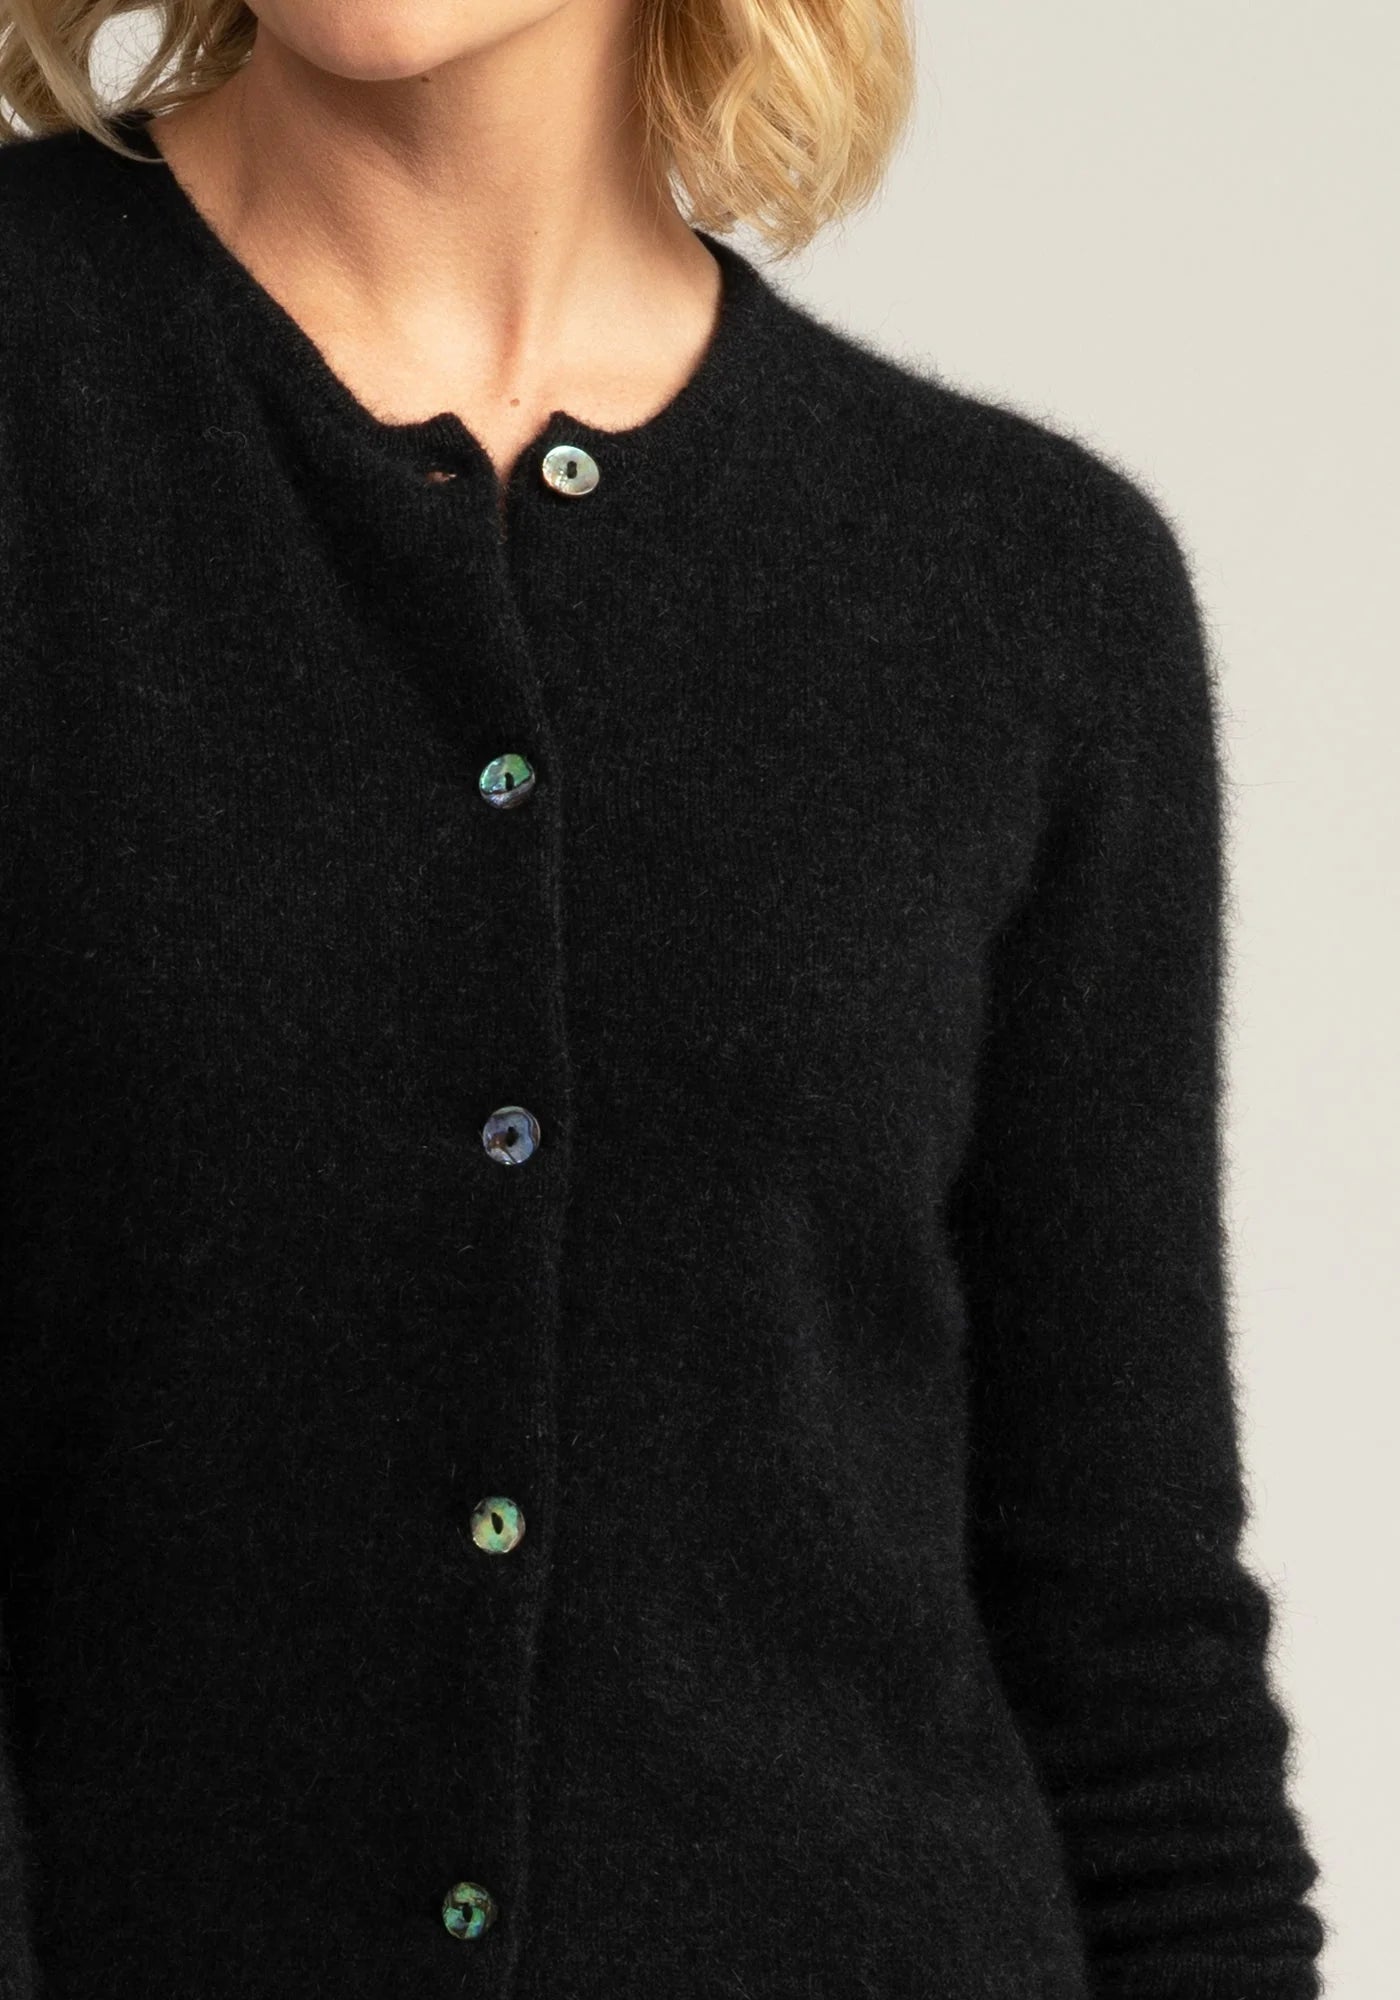 "Elevate your wardrobe with our black merino wool button-up cardigan. Unmatched comfort and elegance await!"